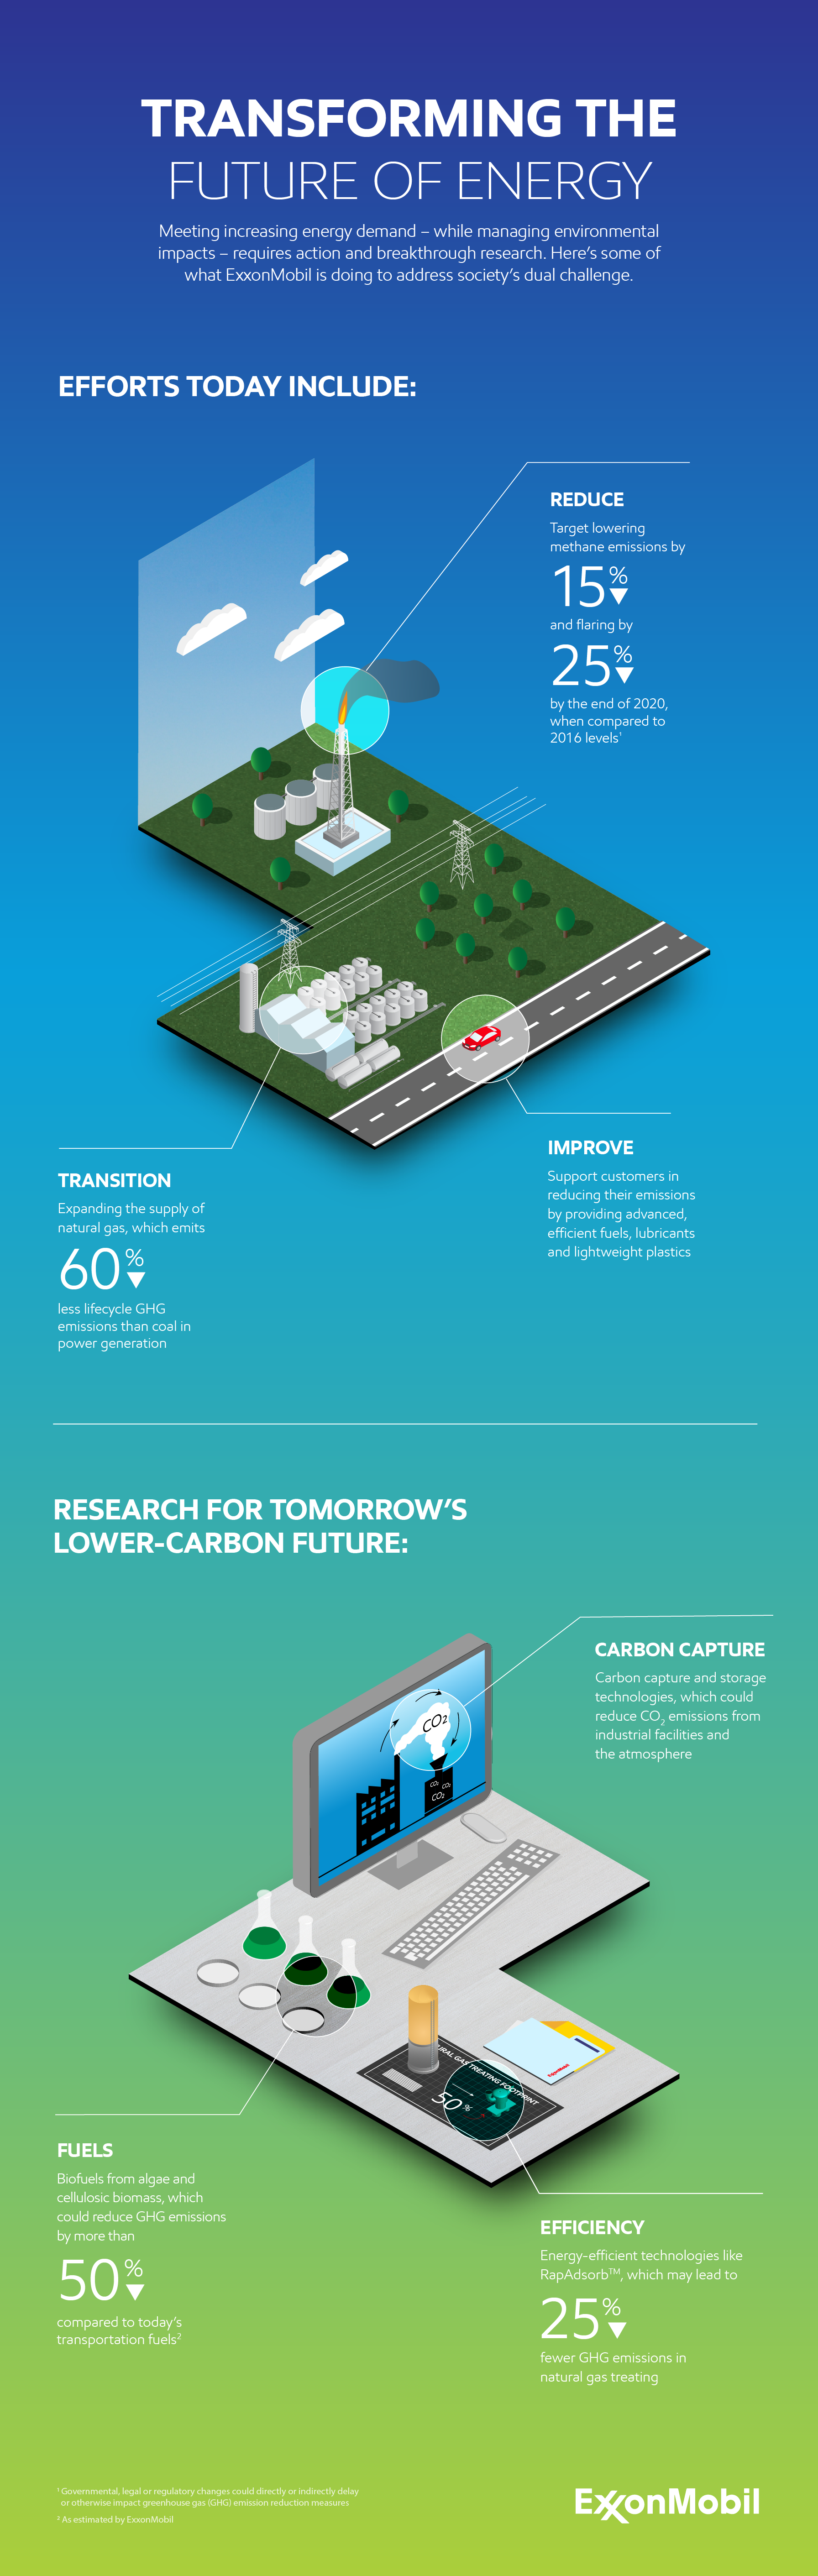 Transforming the future of energy infographic